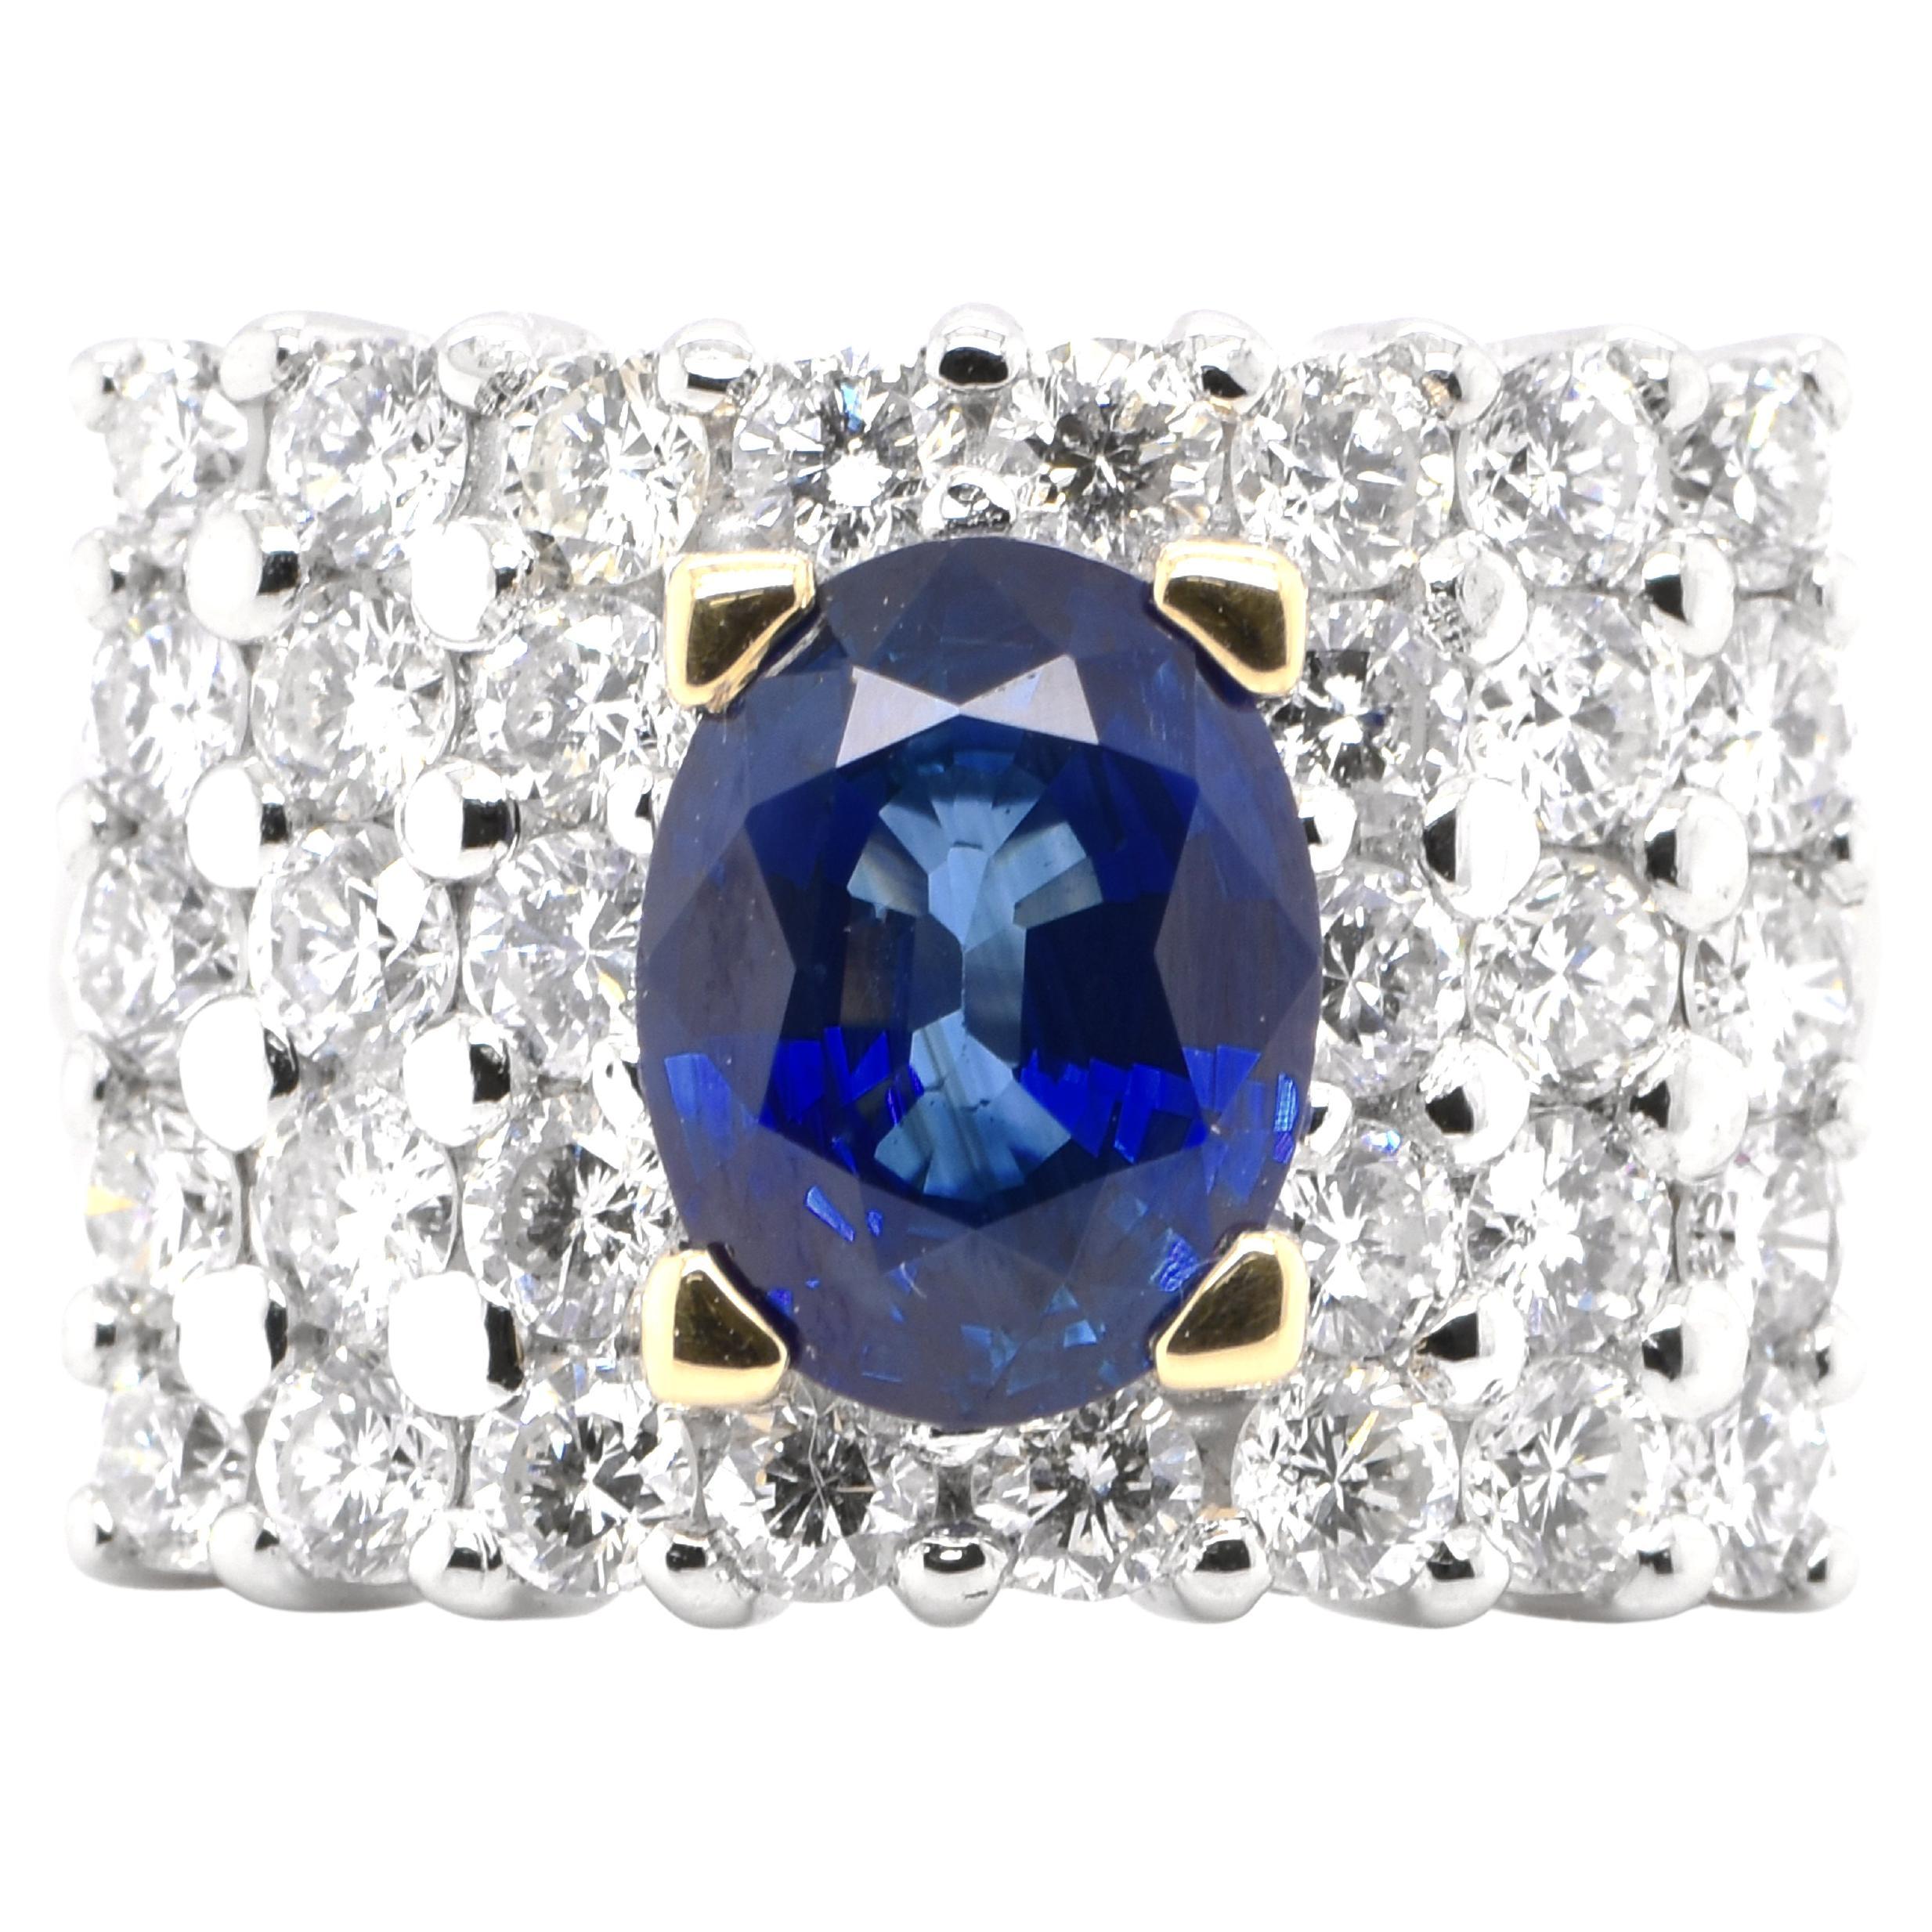 2.55 Carat Natural Blue Sapphire and Diamond Ring Set in Platinum and 18K Gold